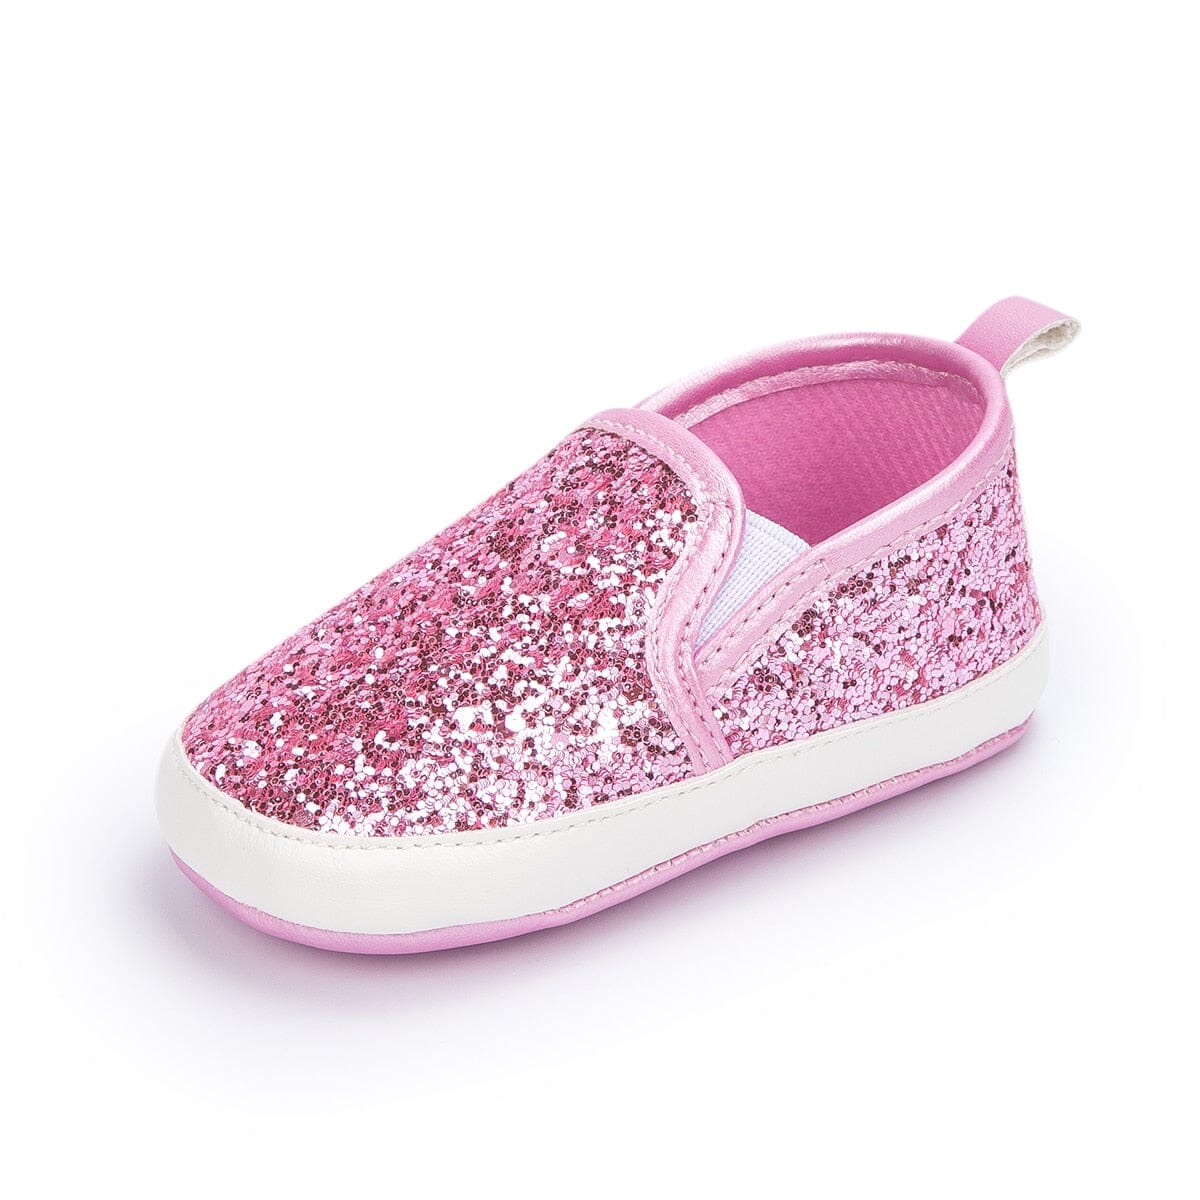 Blissy Premium Outfitters Pink / 13-18 Months Pubbets Glitter Sneakers. Perfect for our Full-Body Puppets!